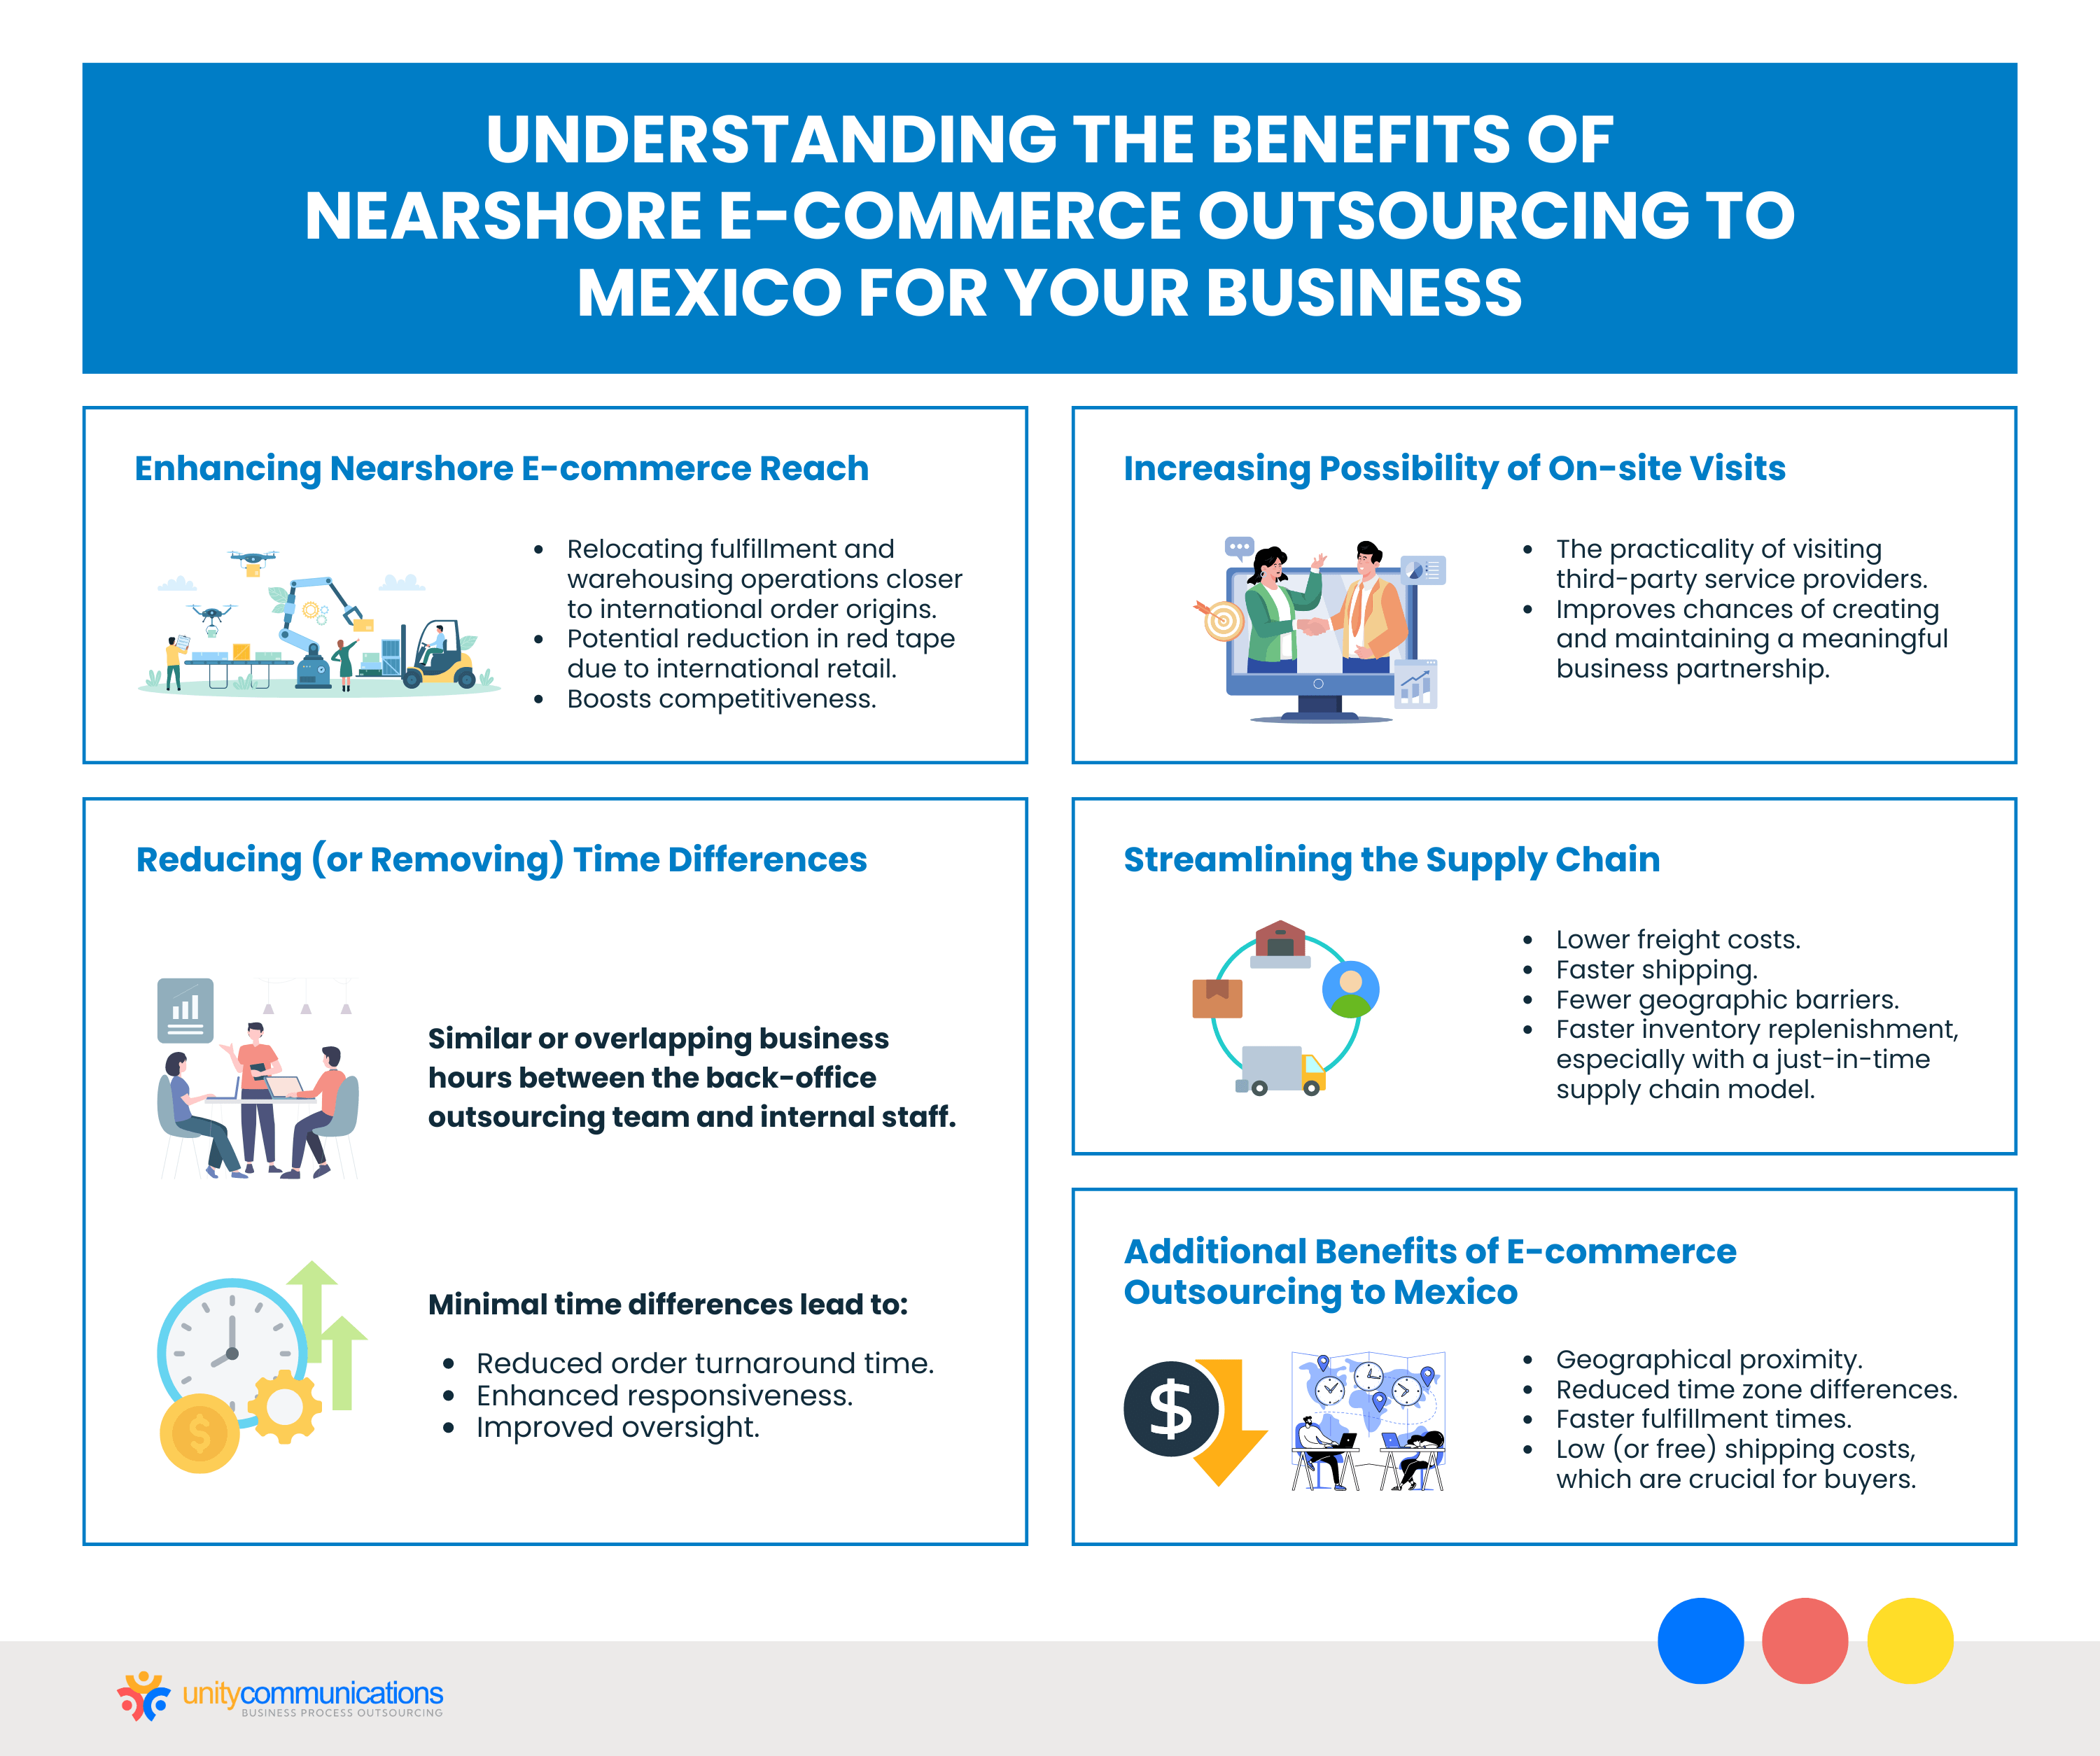 Understanding the Benefits of Nearshore E-commerce Outsourcing to Mexico for Your Business